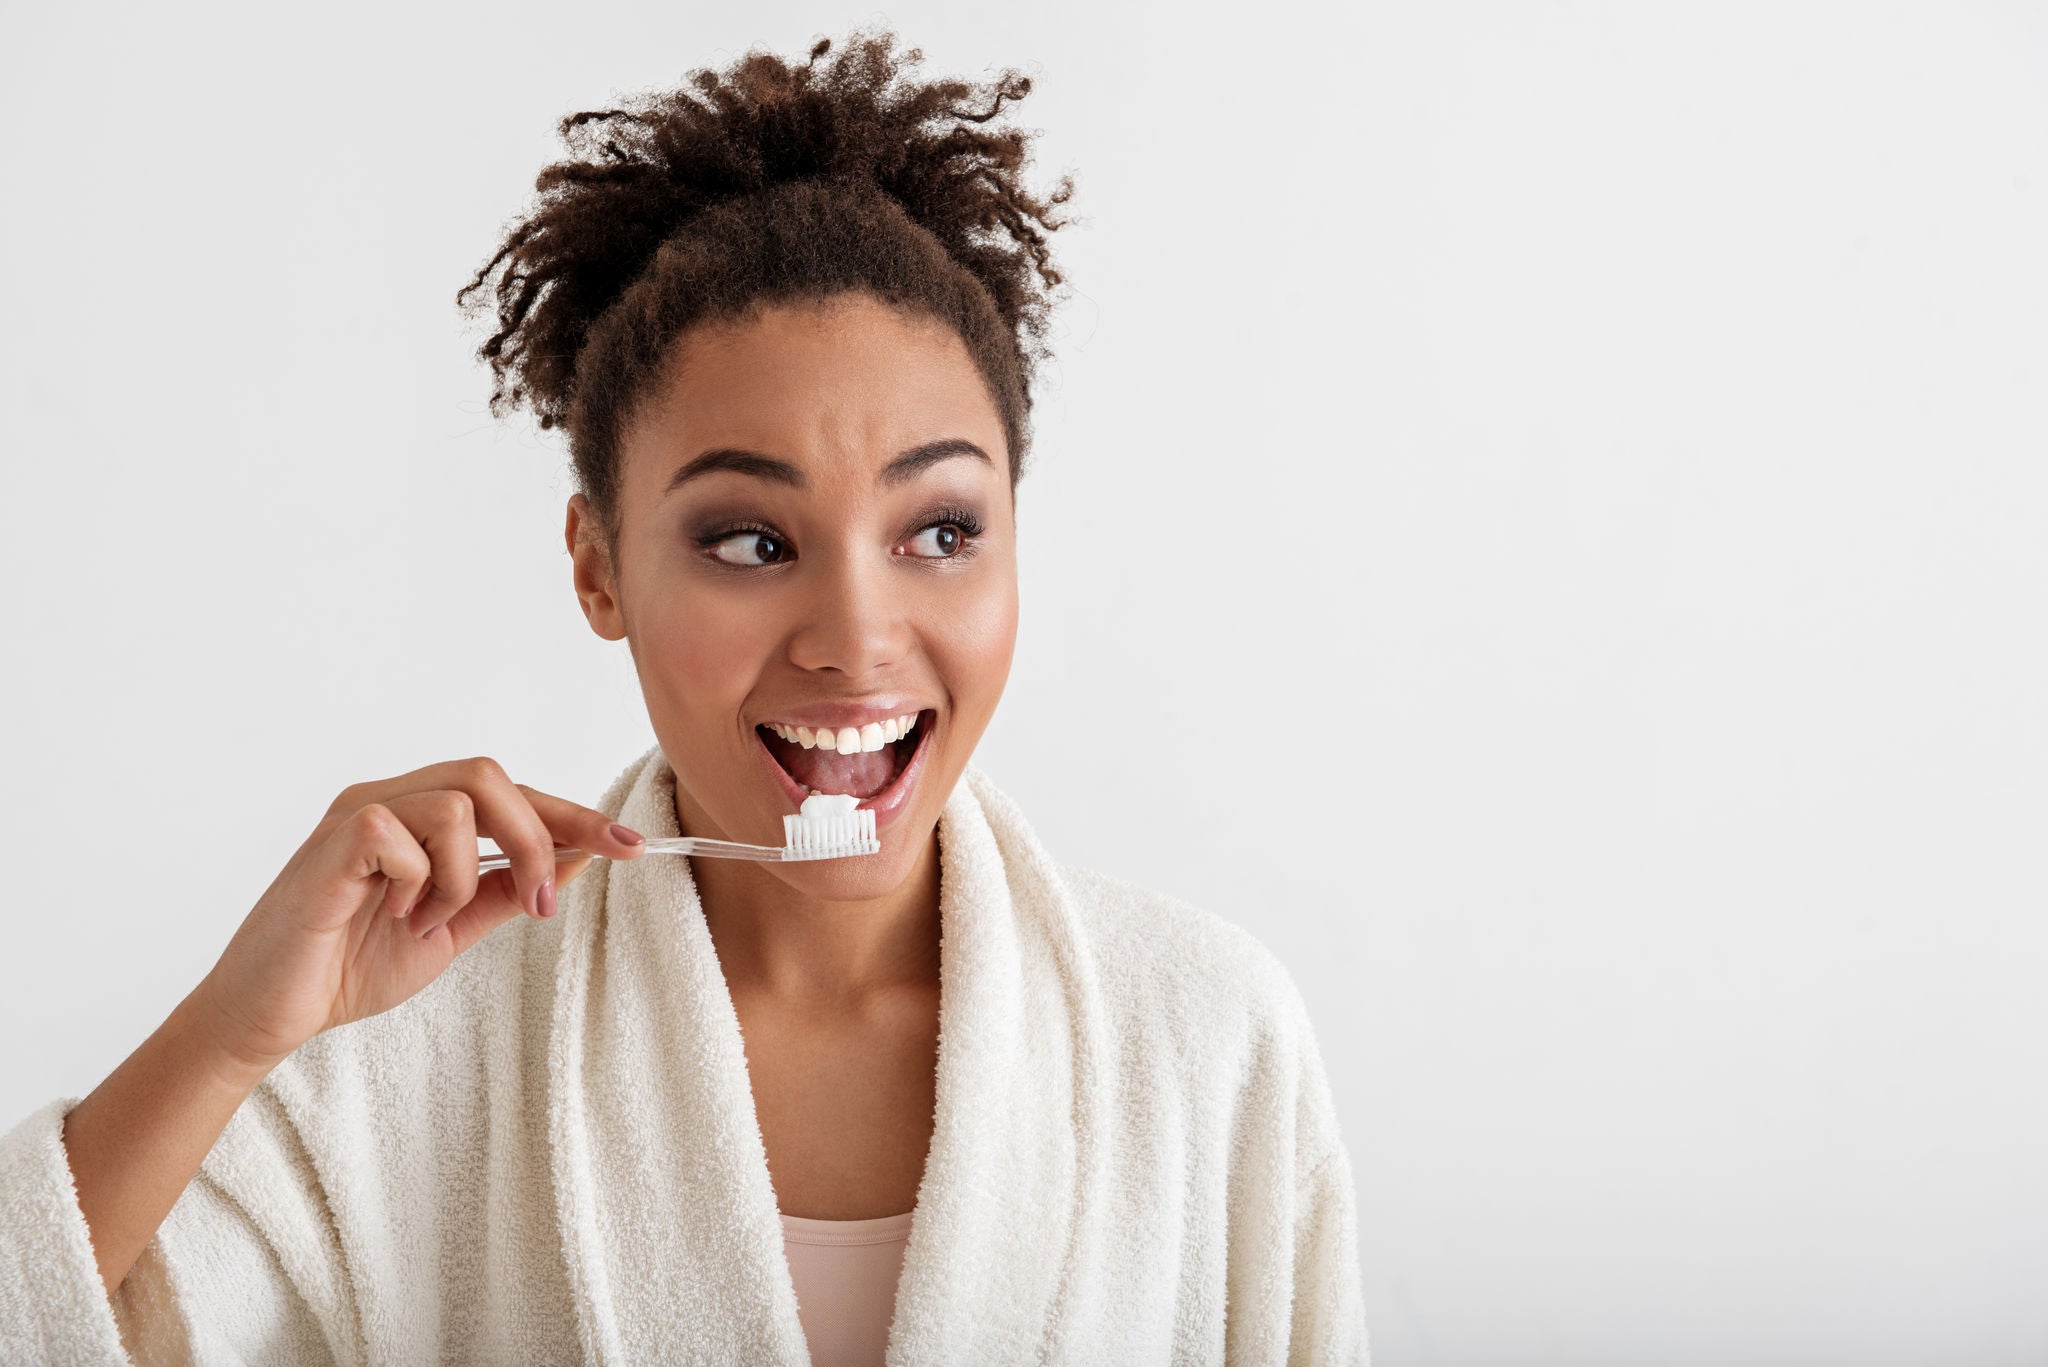 Portrait of smiling girl brushing teeth. She is wearing housecoat and looking aside with happiness. Copy space in right side. Isolated on background